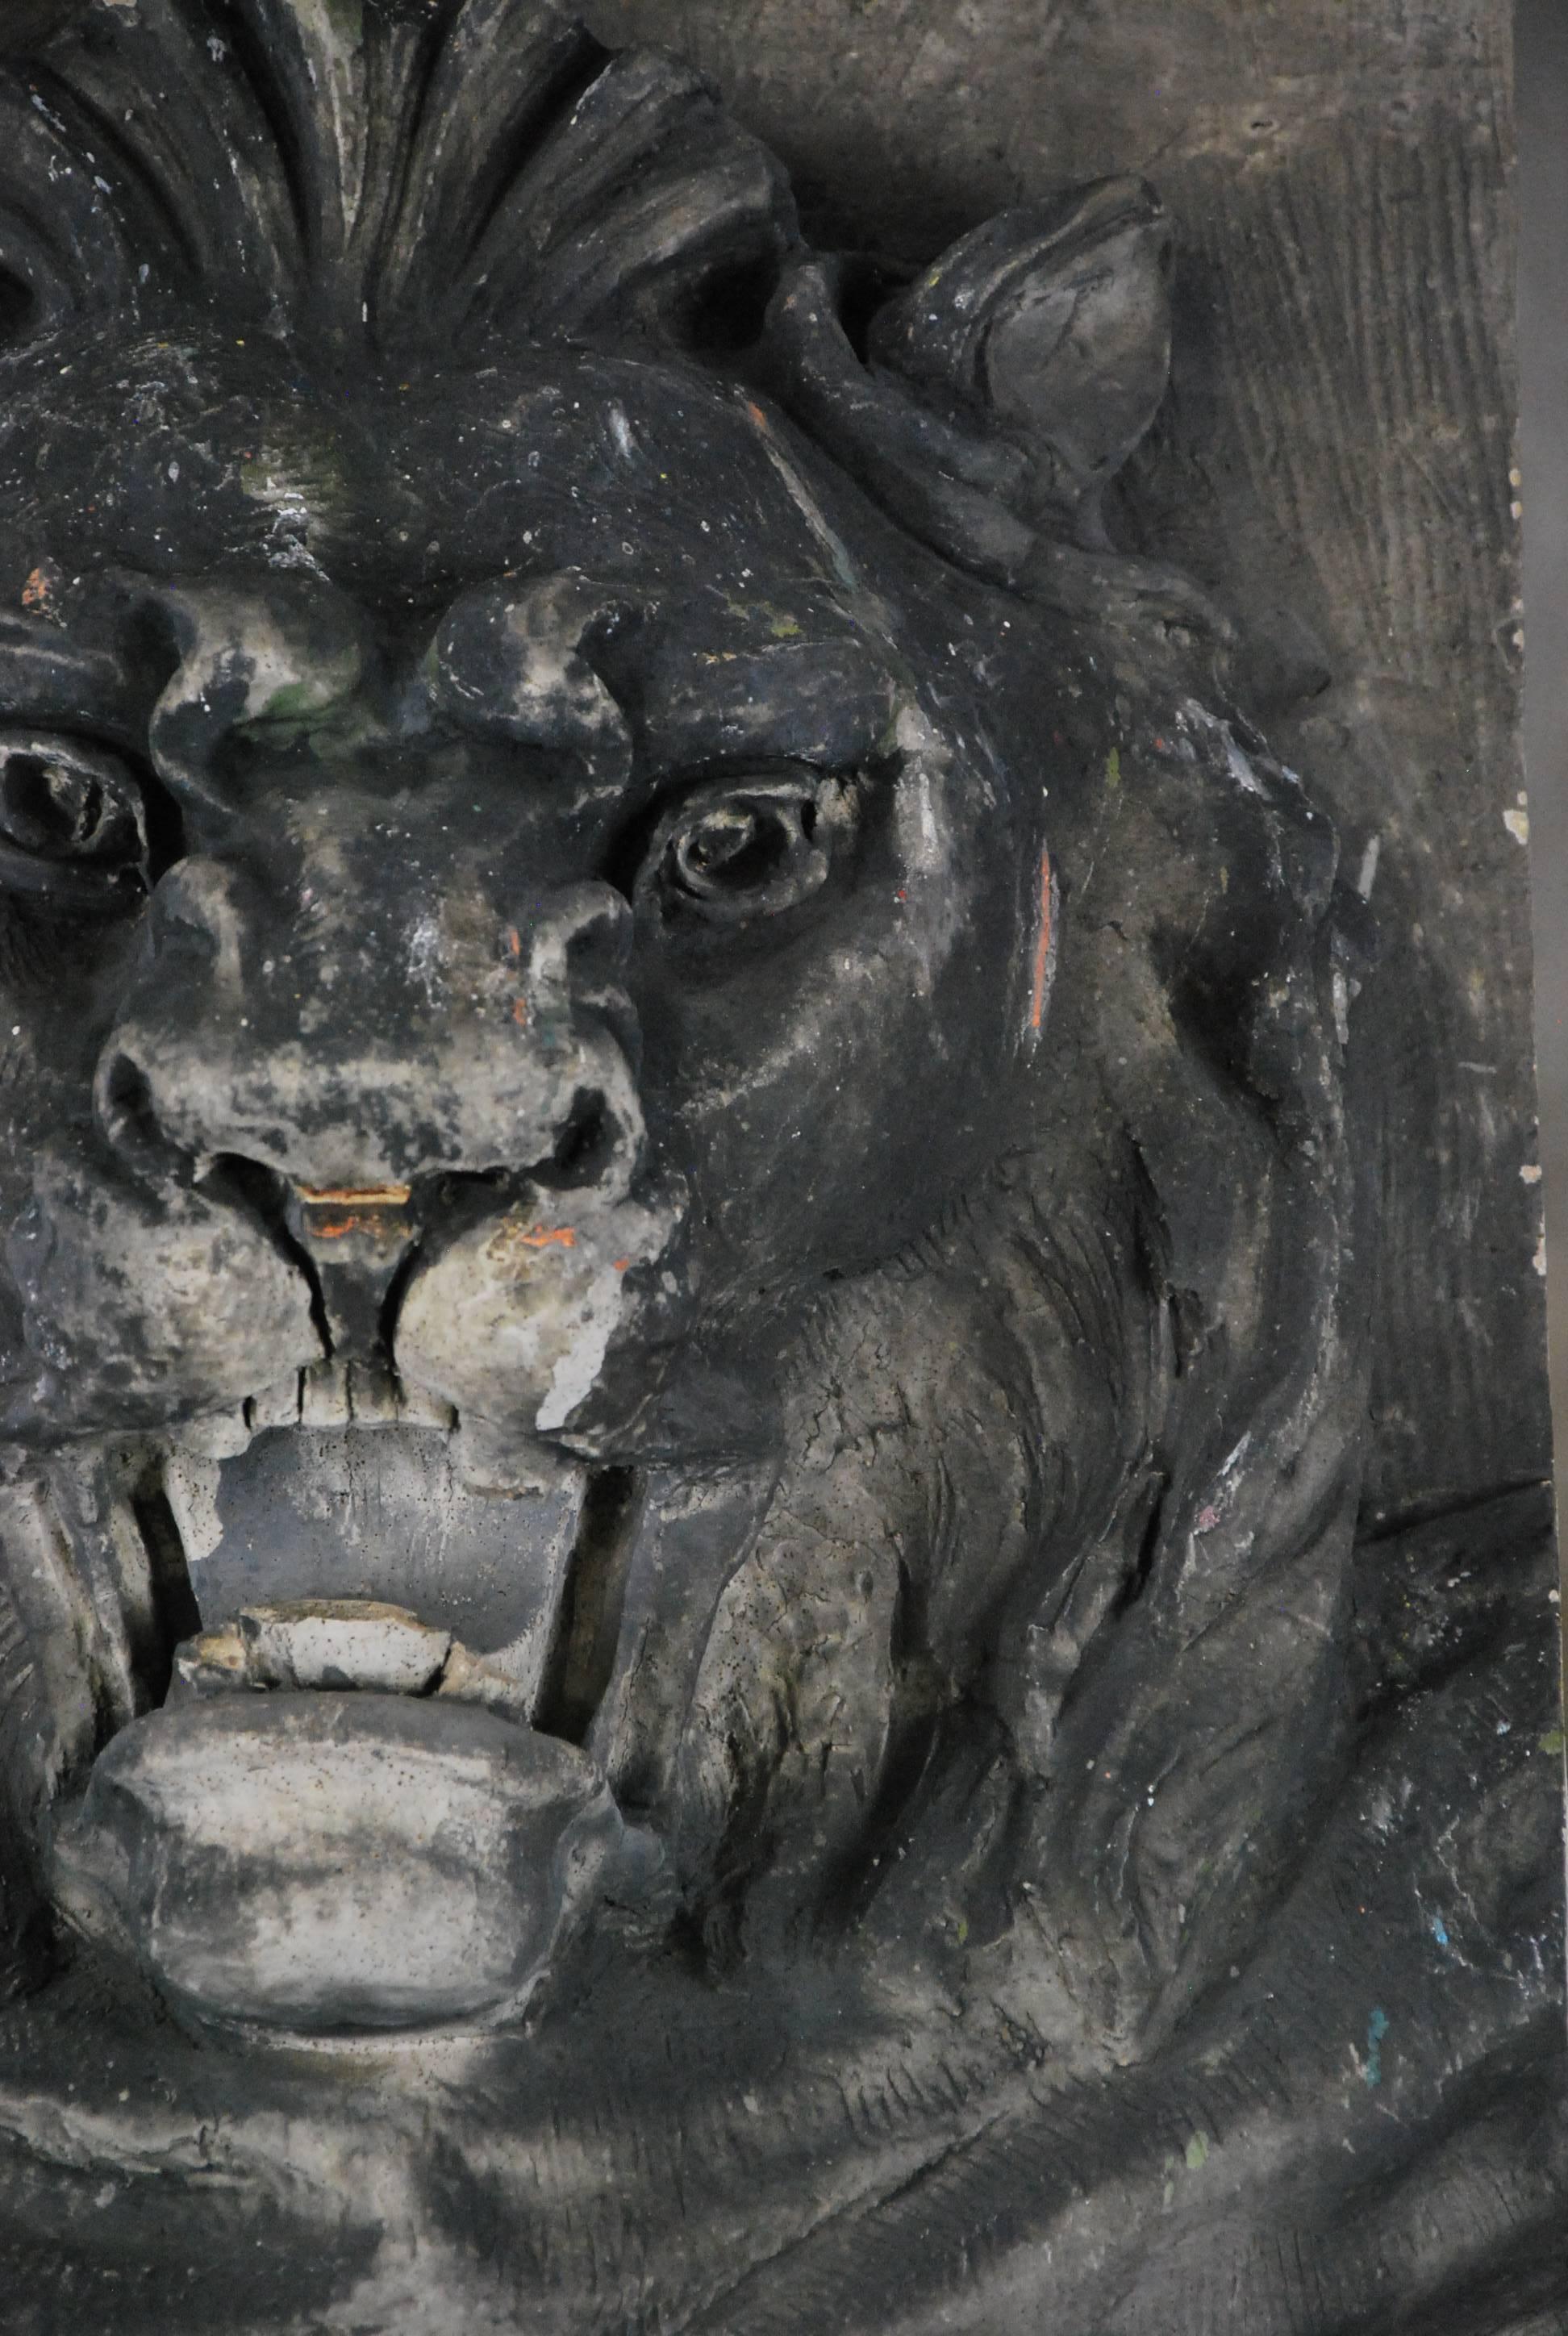 Limestone lion face salvaged from a theatre building in Time Square known as the Columbia Theatre. 

Originally opened on January 10th, 1910 as the Columbia Theatre on Times Square at the northeast corner of W. 47th Street and Broadway/7th Avenue